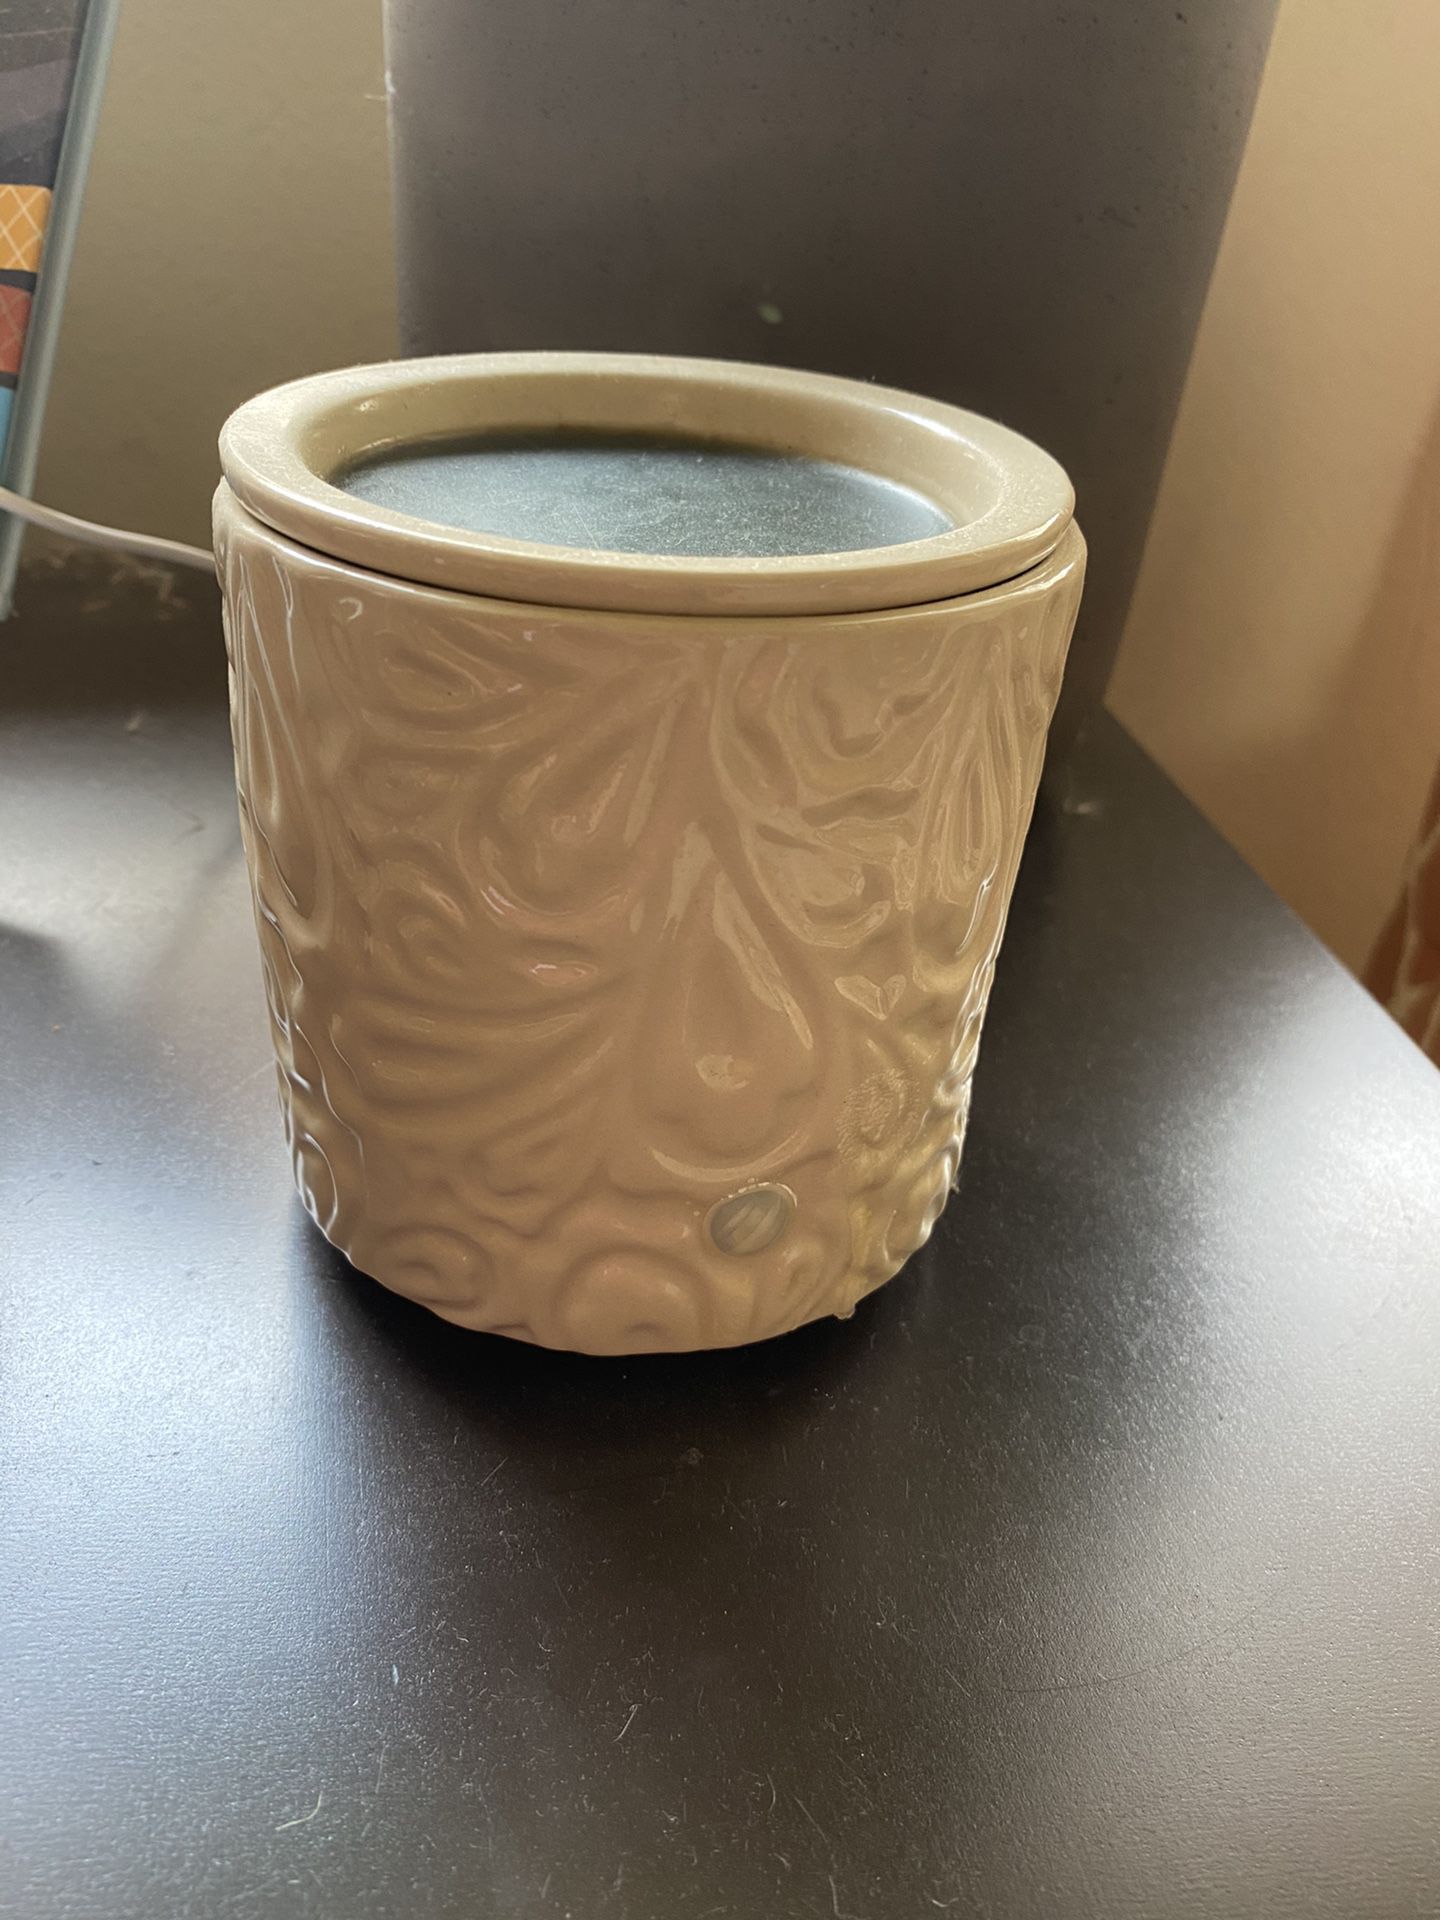 Wax warmer and oil diffuser